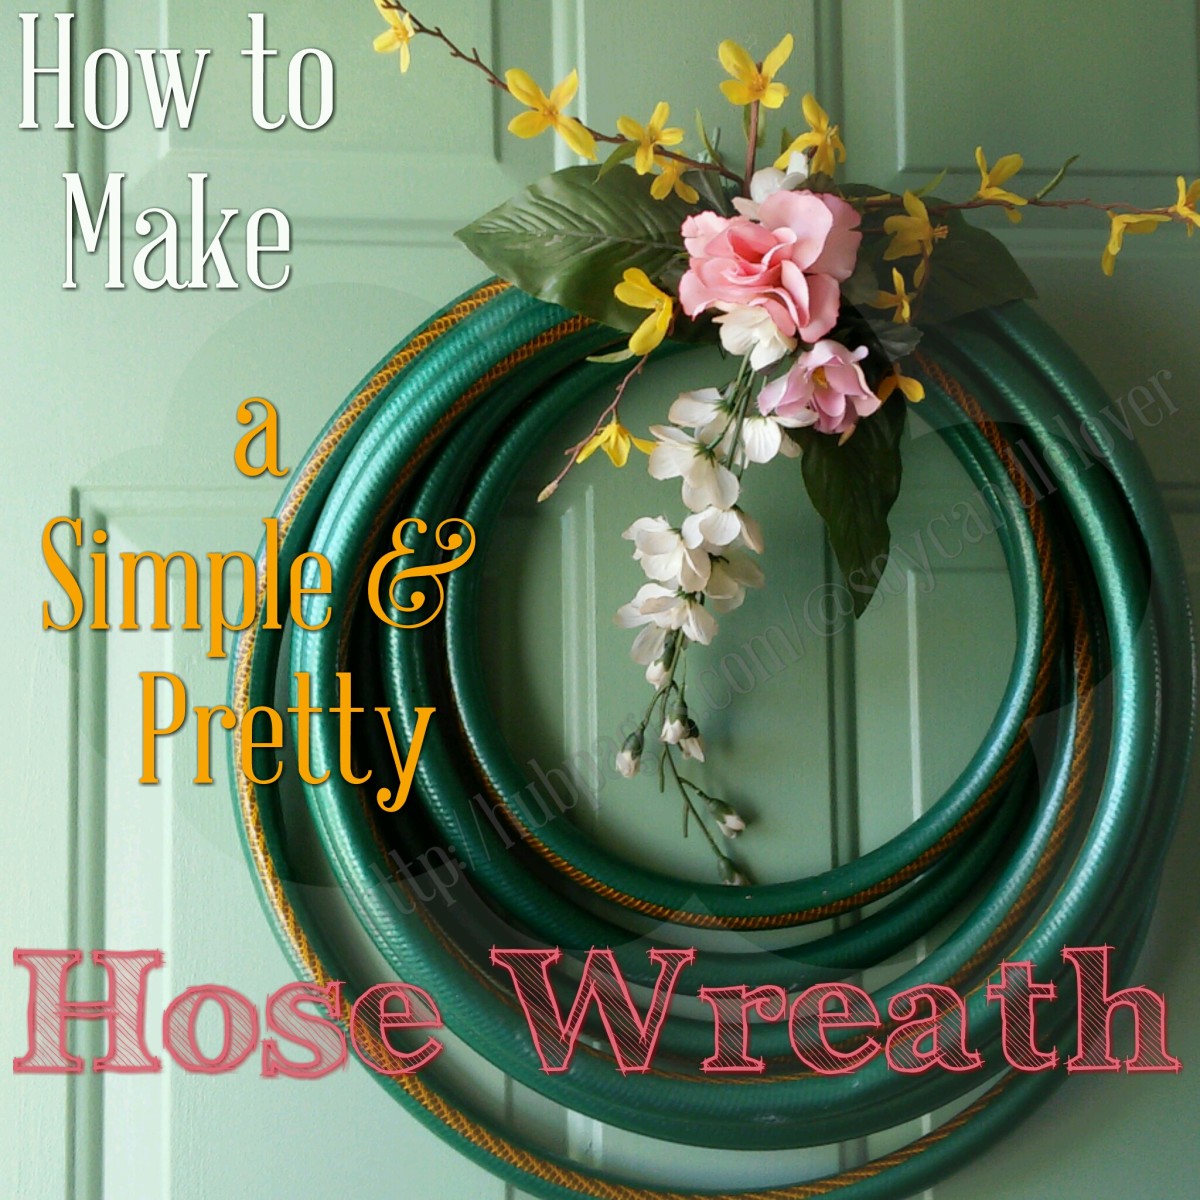 How to make a Simple Garden Hose Wreath from an Old Leaky Water Hose